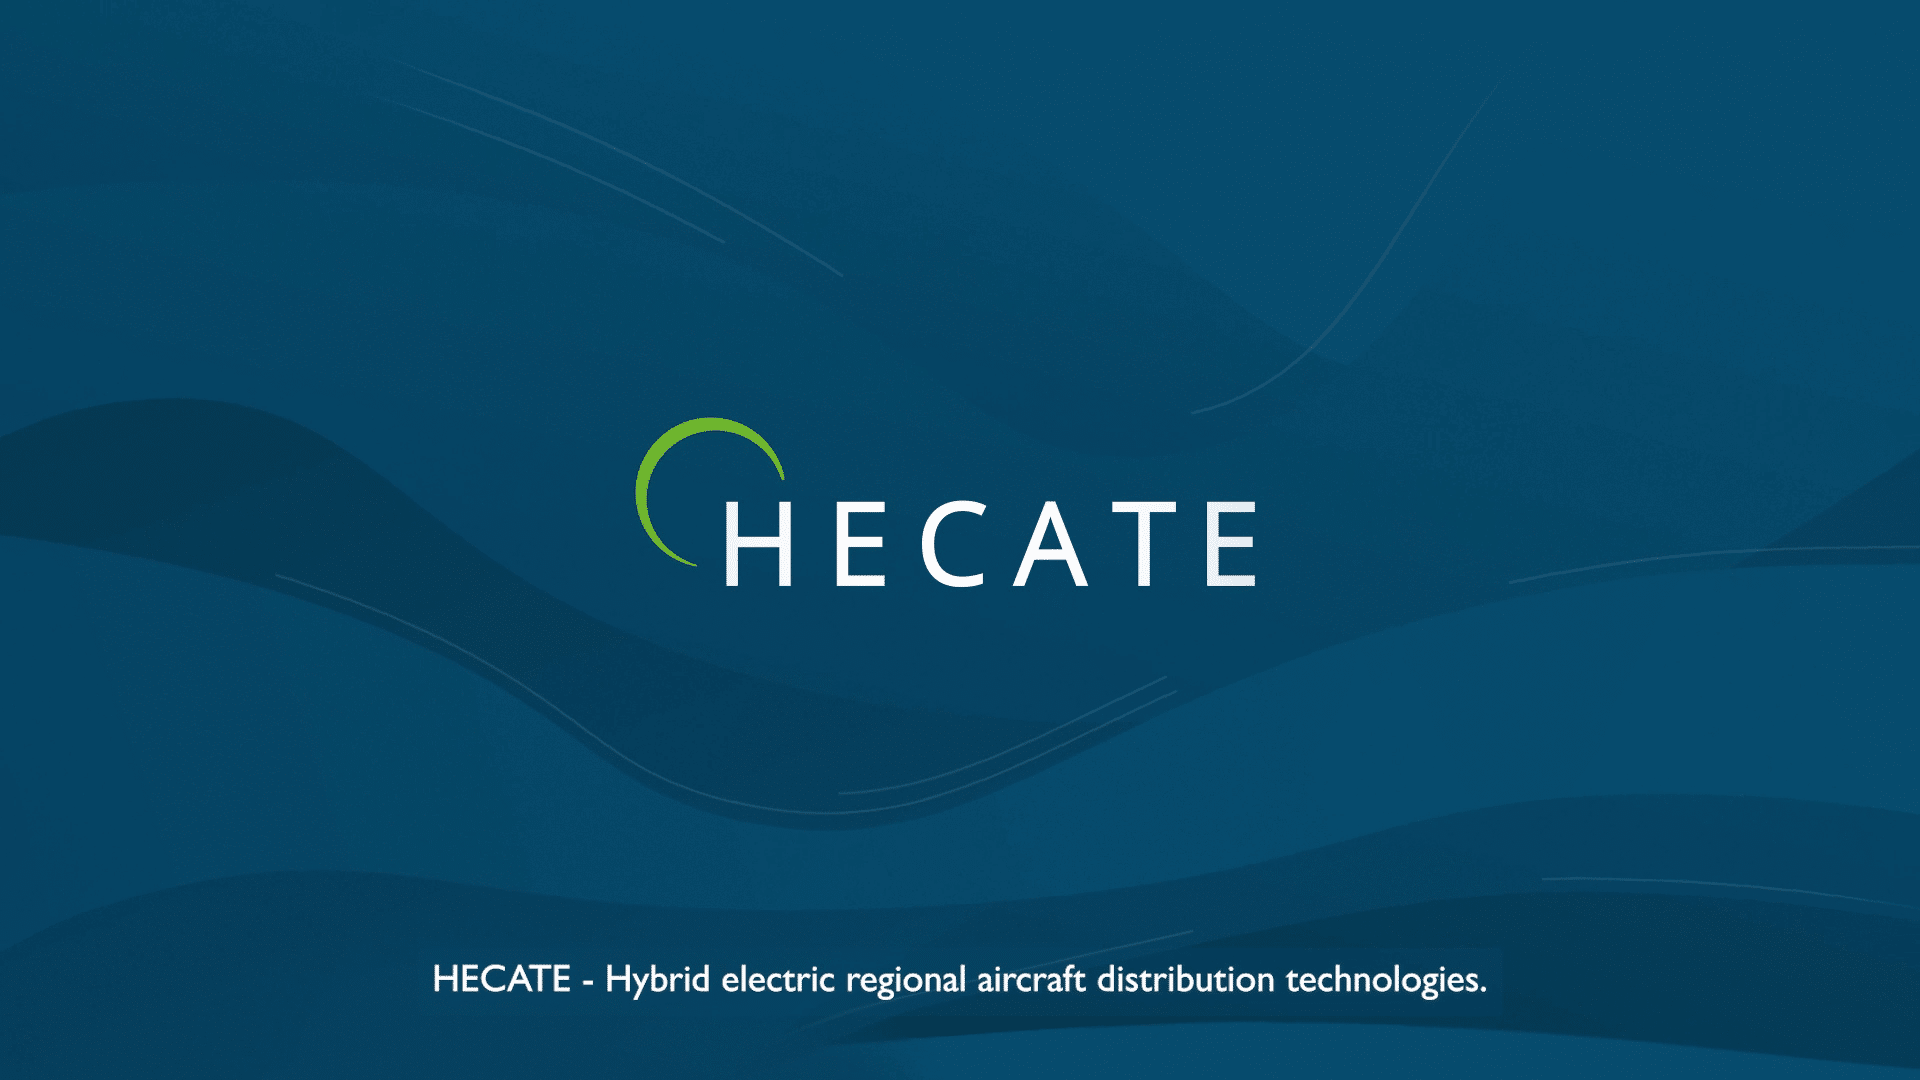 HECATE video is released! - Hecate